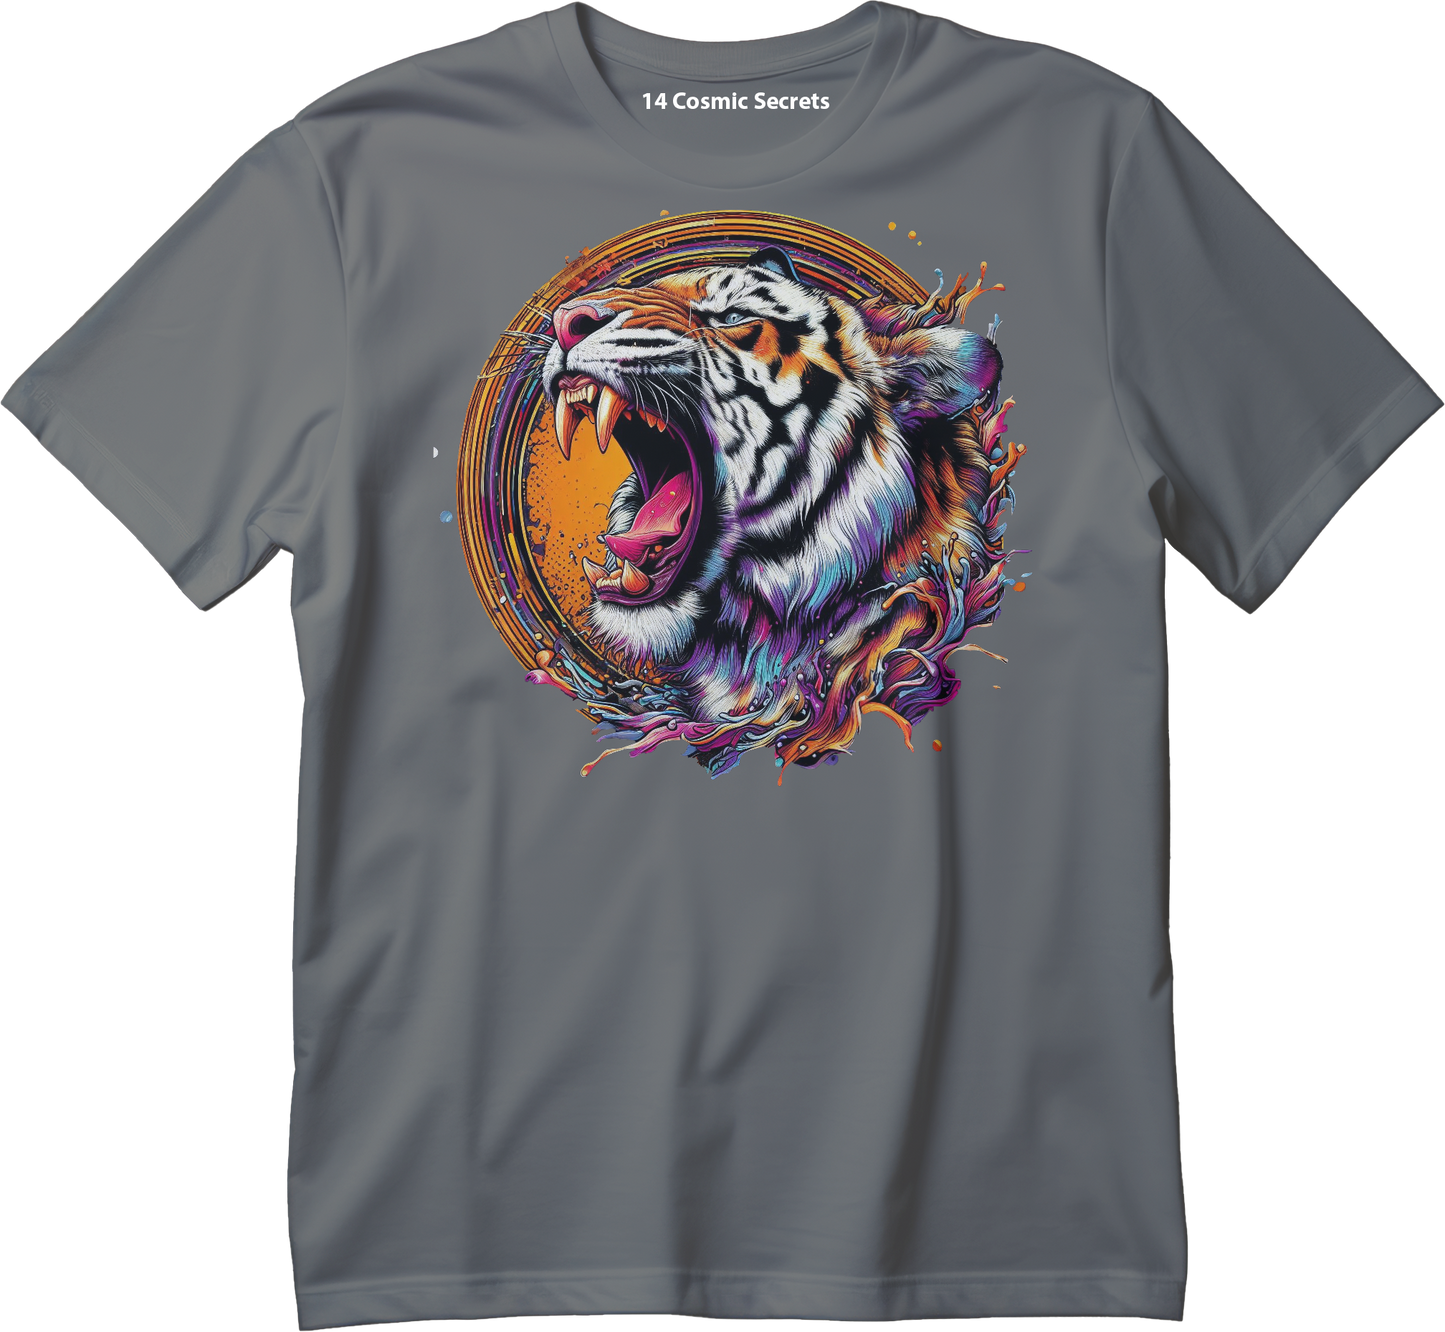 Wildlife Royalty Tee Graphic Printed T-Shirt  Cotton T-Shirt Magnificence of India T-Shirt